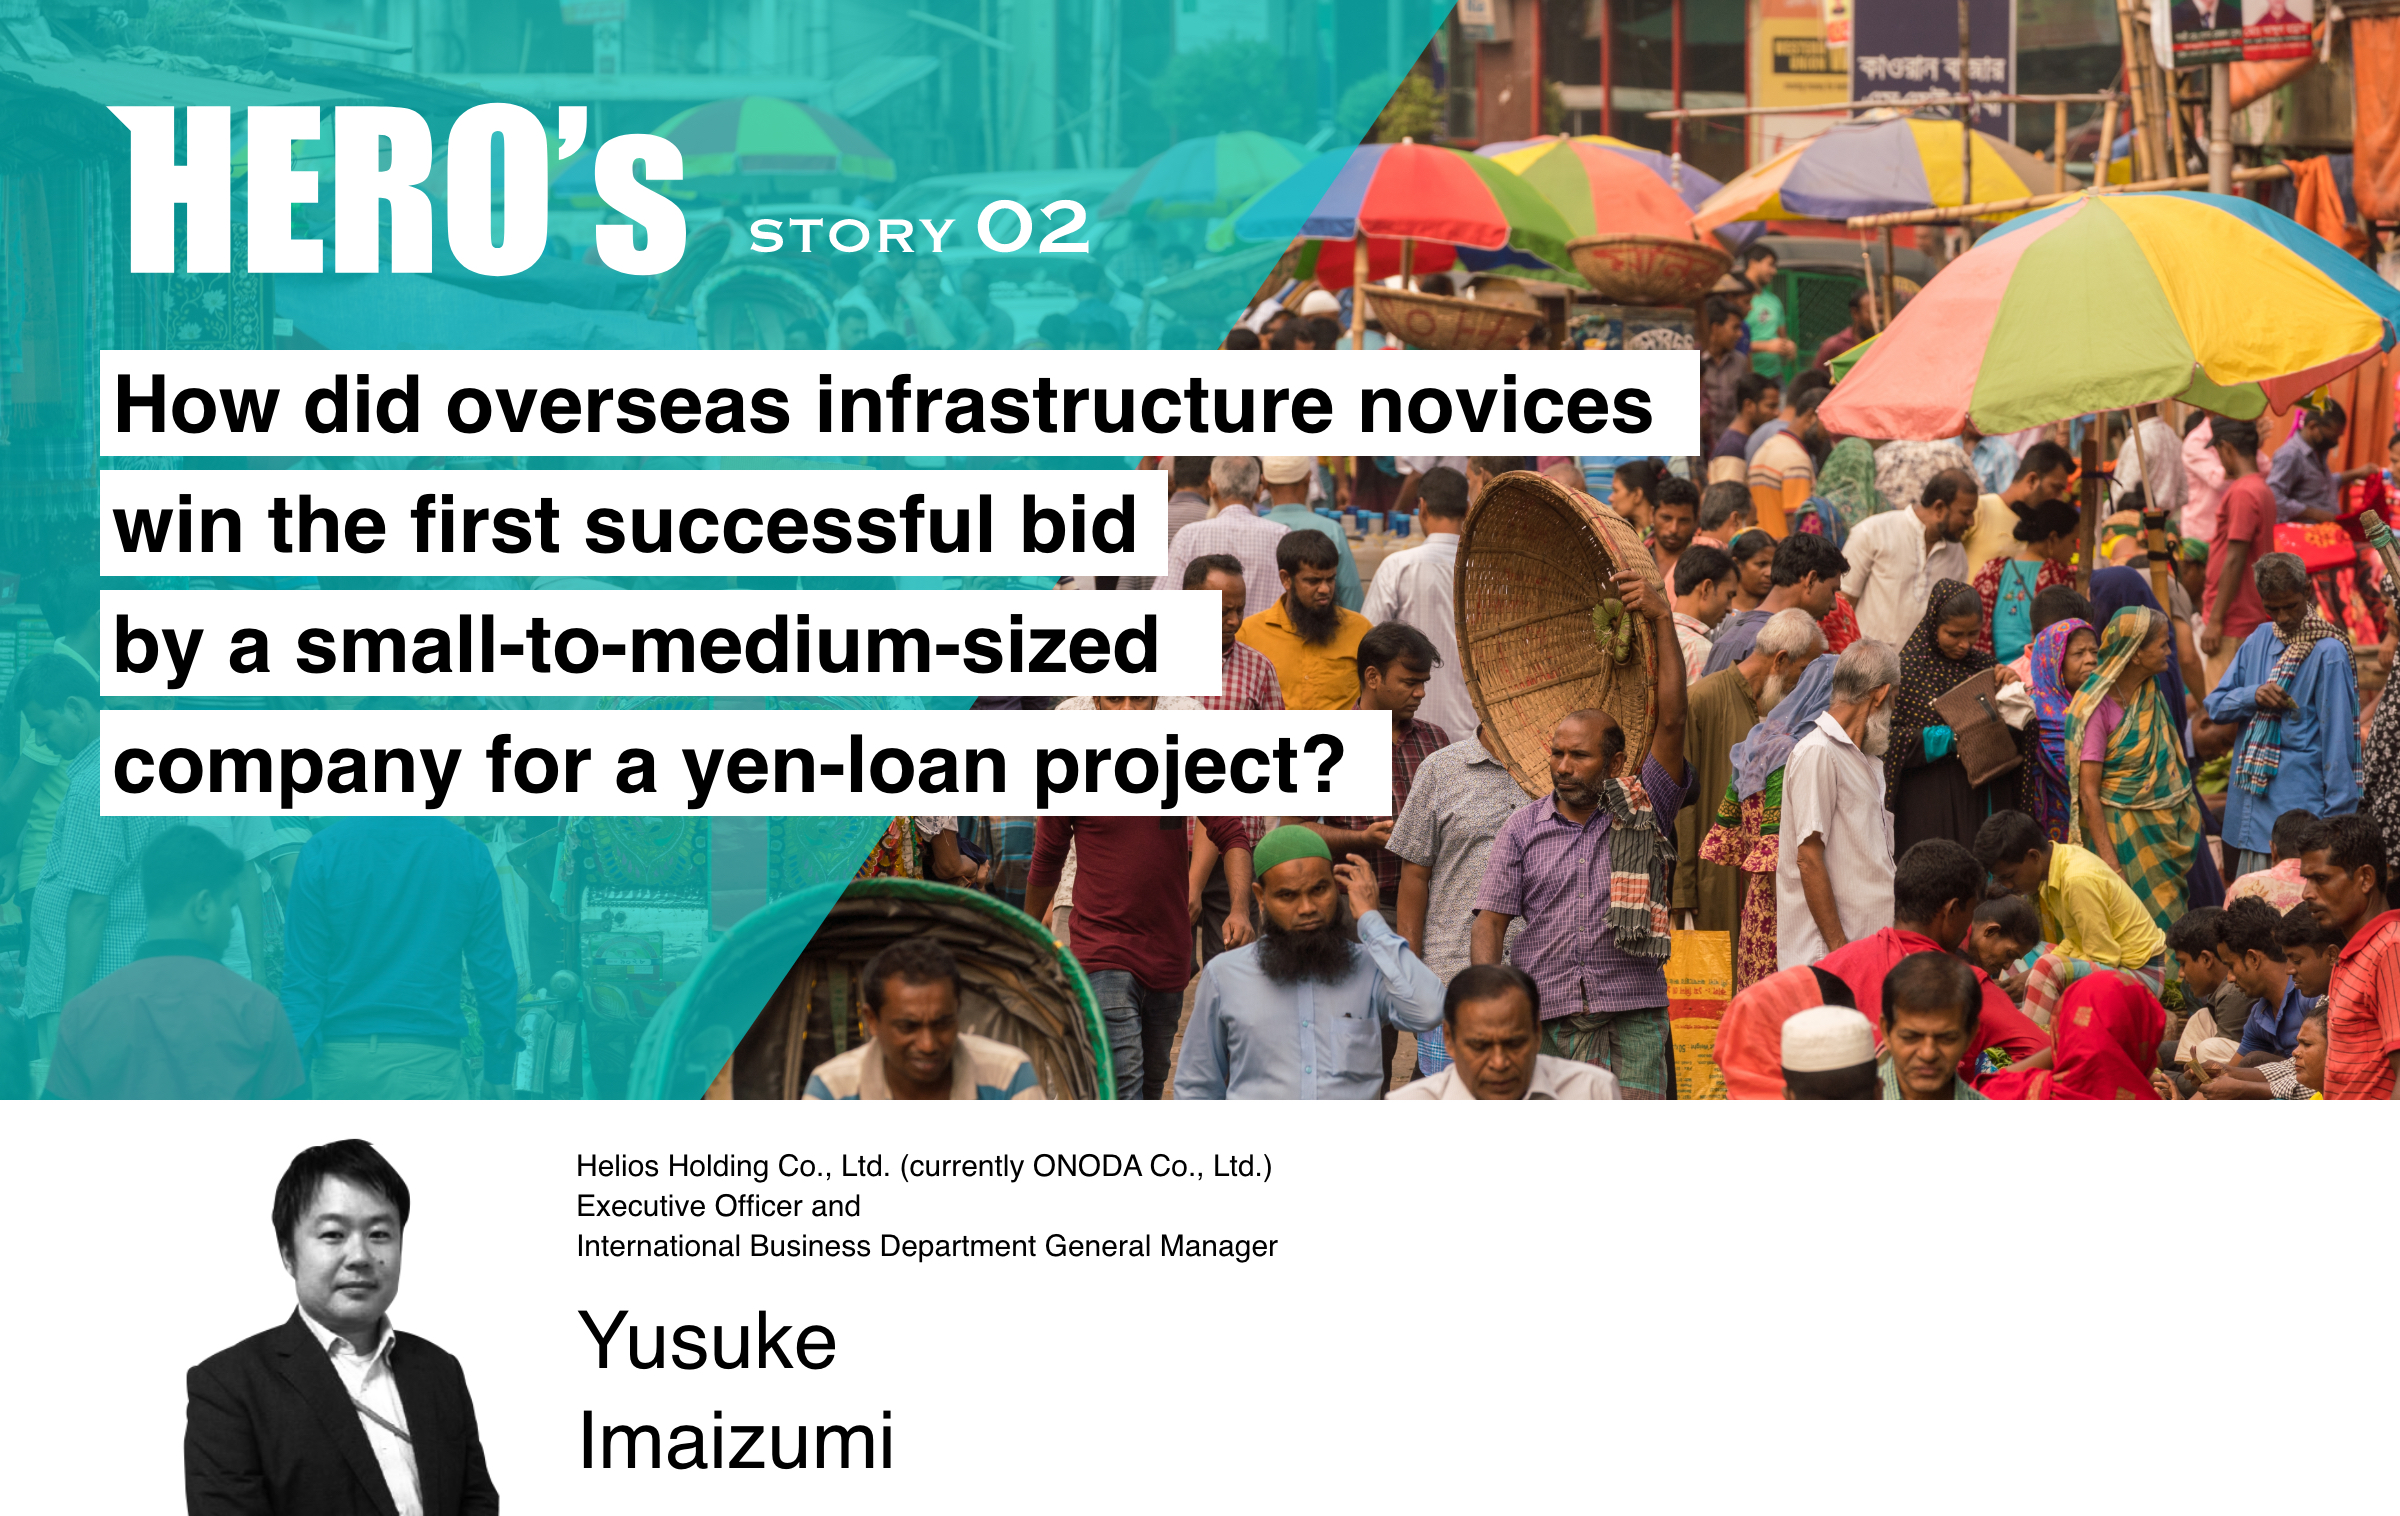 HERO's STORY 02 How did overseas infrastructure novices win the first successful bid by a small-to-medium-sized company for a yen-loan project? Helios Holding Co., Ltd. (currently ONODA Co., Ltd.) Executive Officer and International Business Department General Manager Yusuke Imaizumi